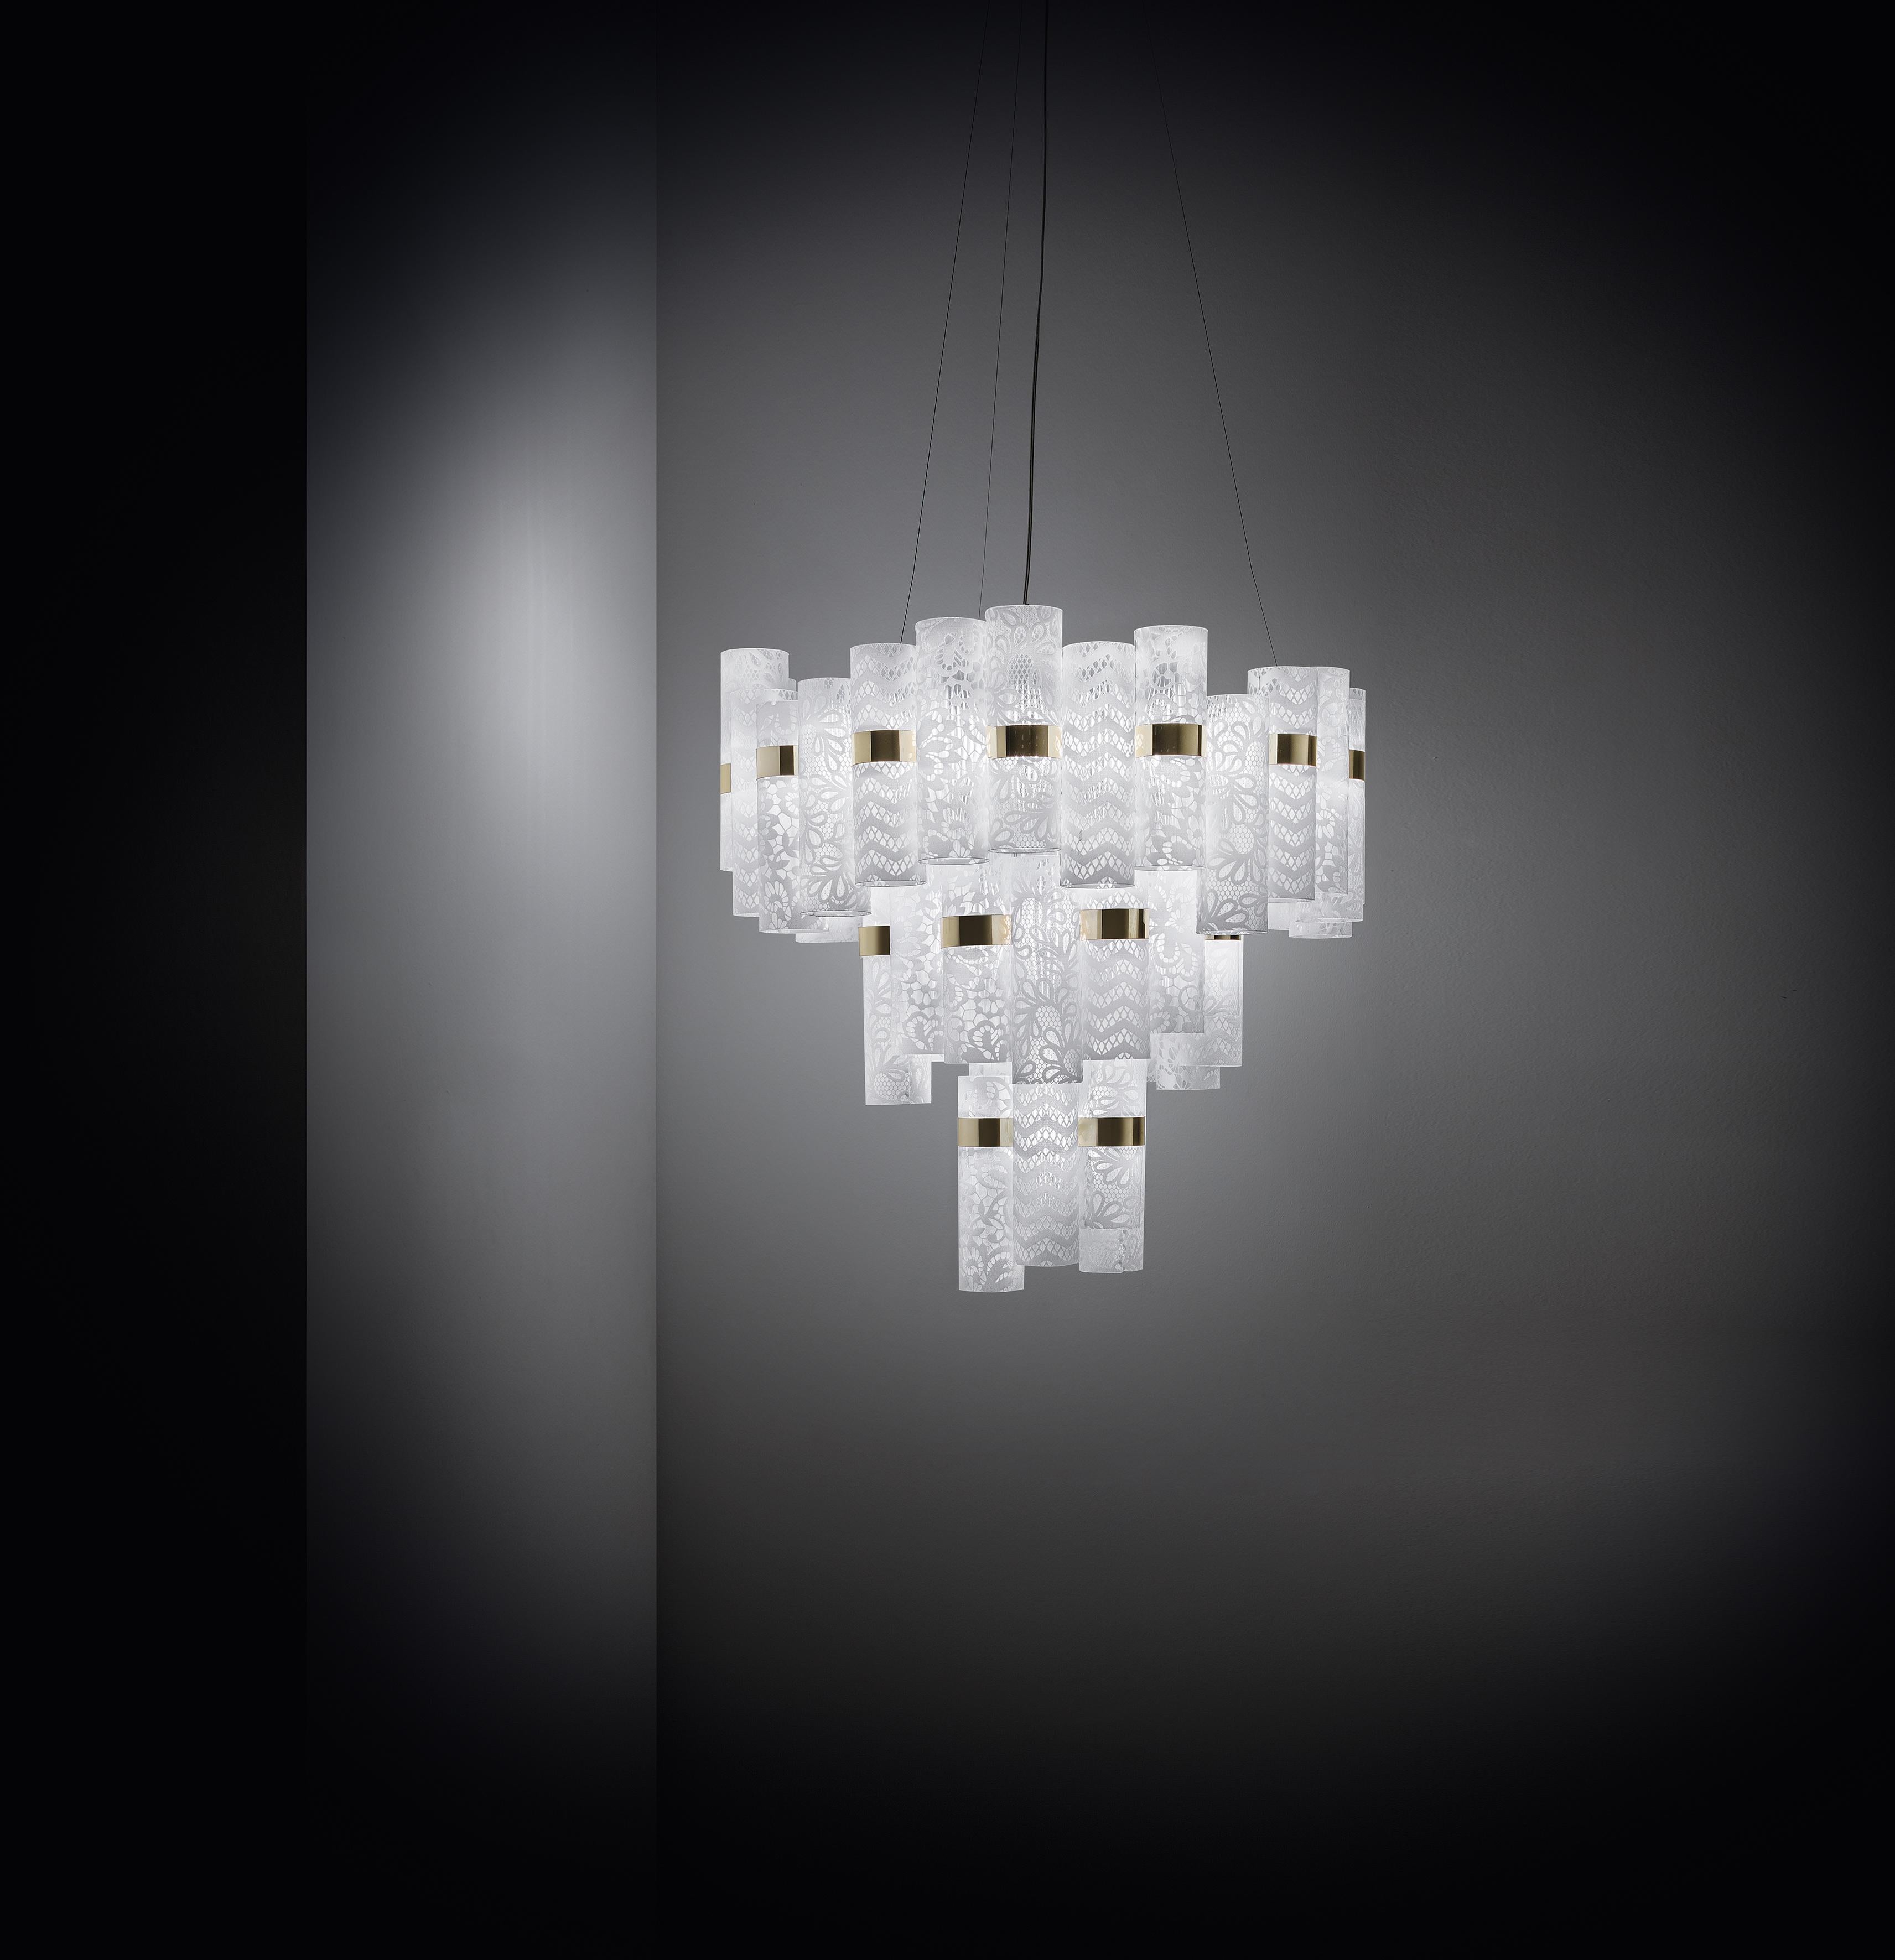 La Lollo is a tribute to the roaring 50’s, a series of graceful suspensions that reawaken images of divas in the spotlight. The patented techno-polymer cylinders, in varying shades of contemporary prismatic metallization and geometric patterns,